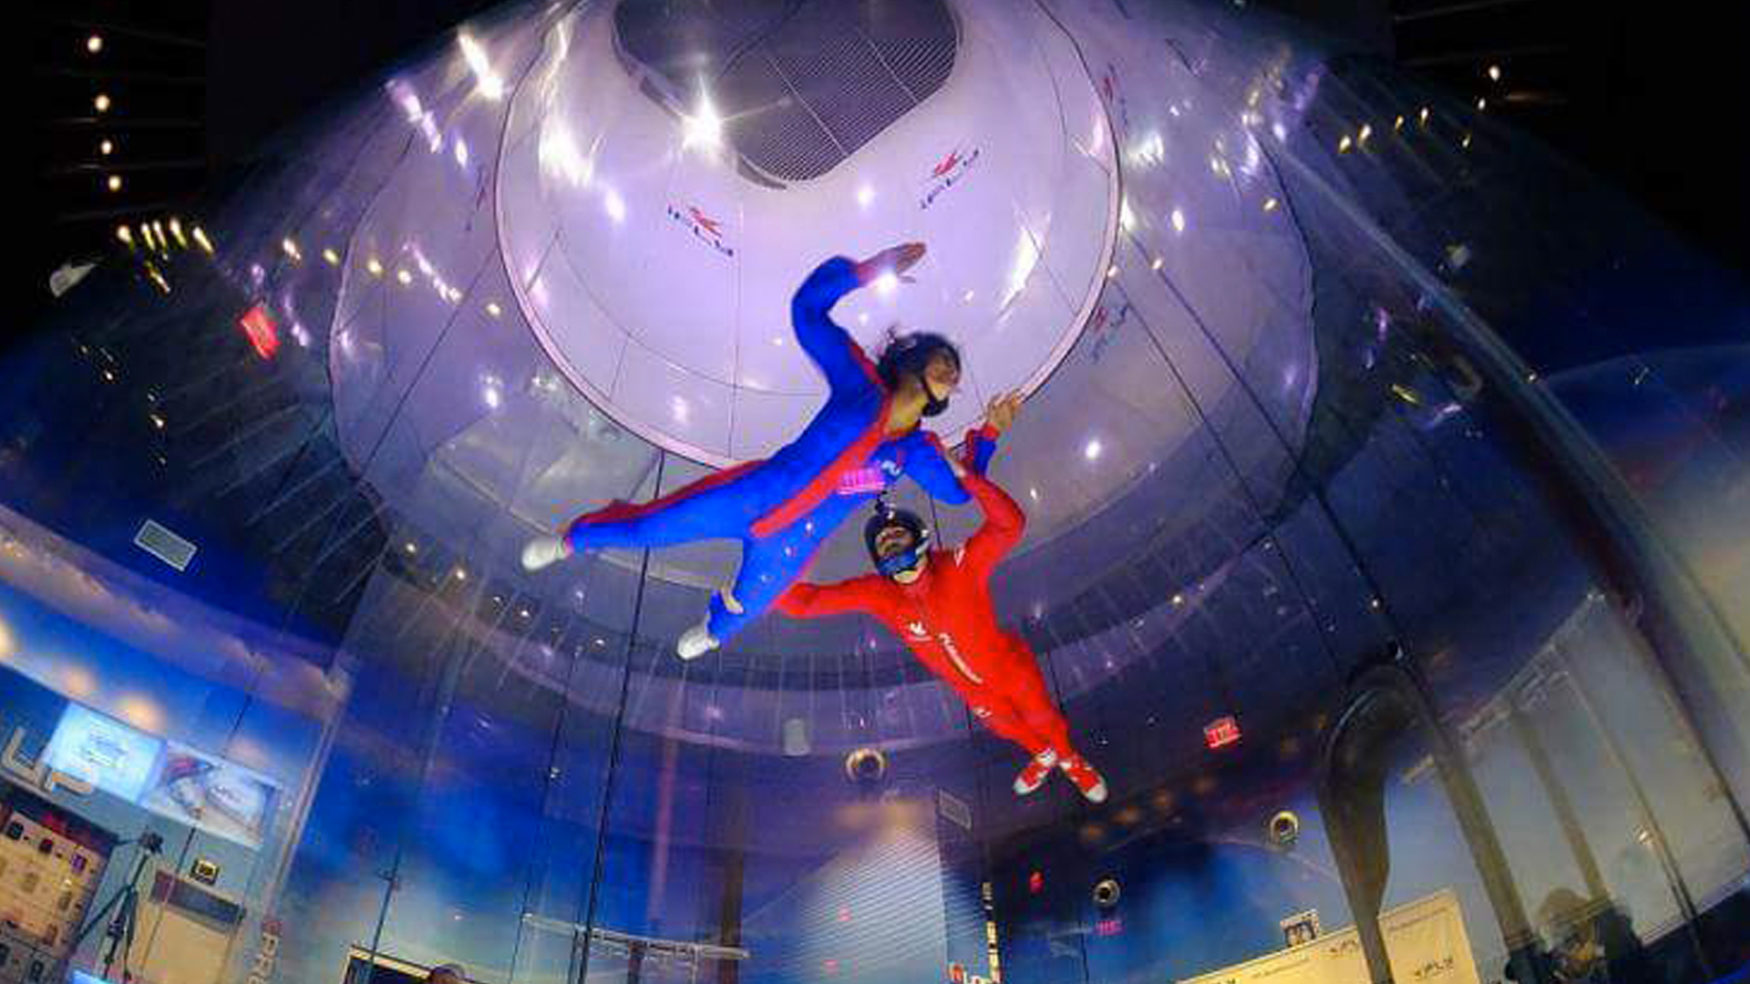 #Astrolete Training What’s an IFly?